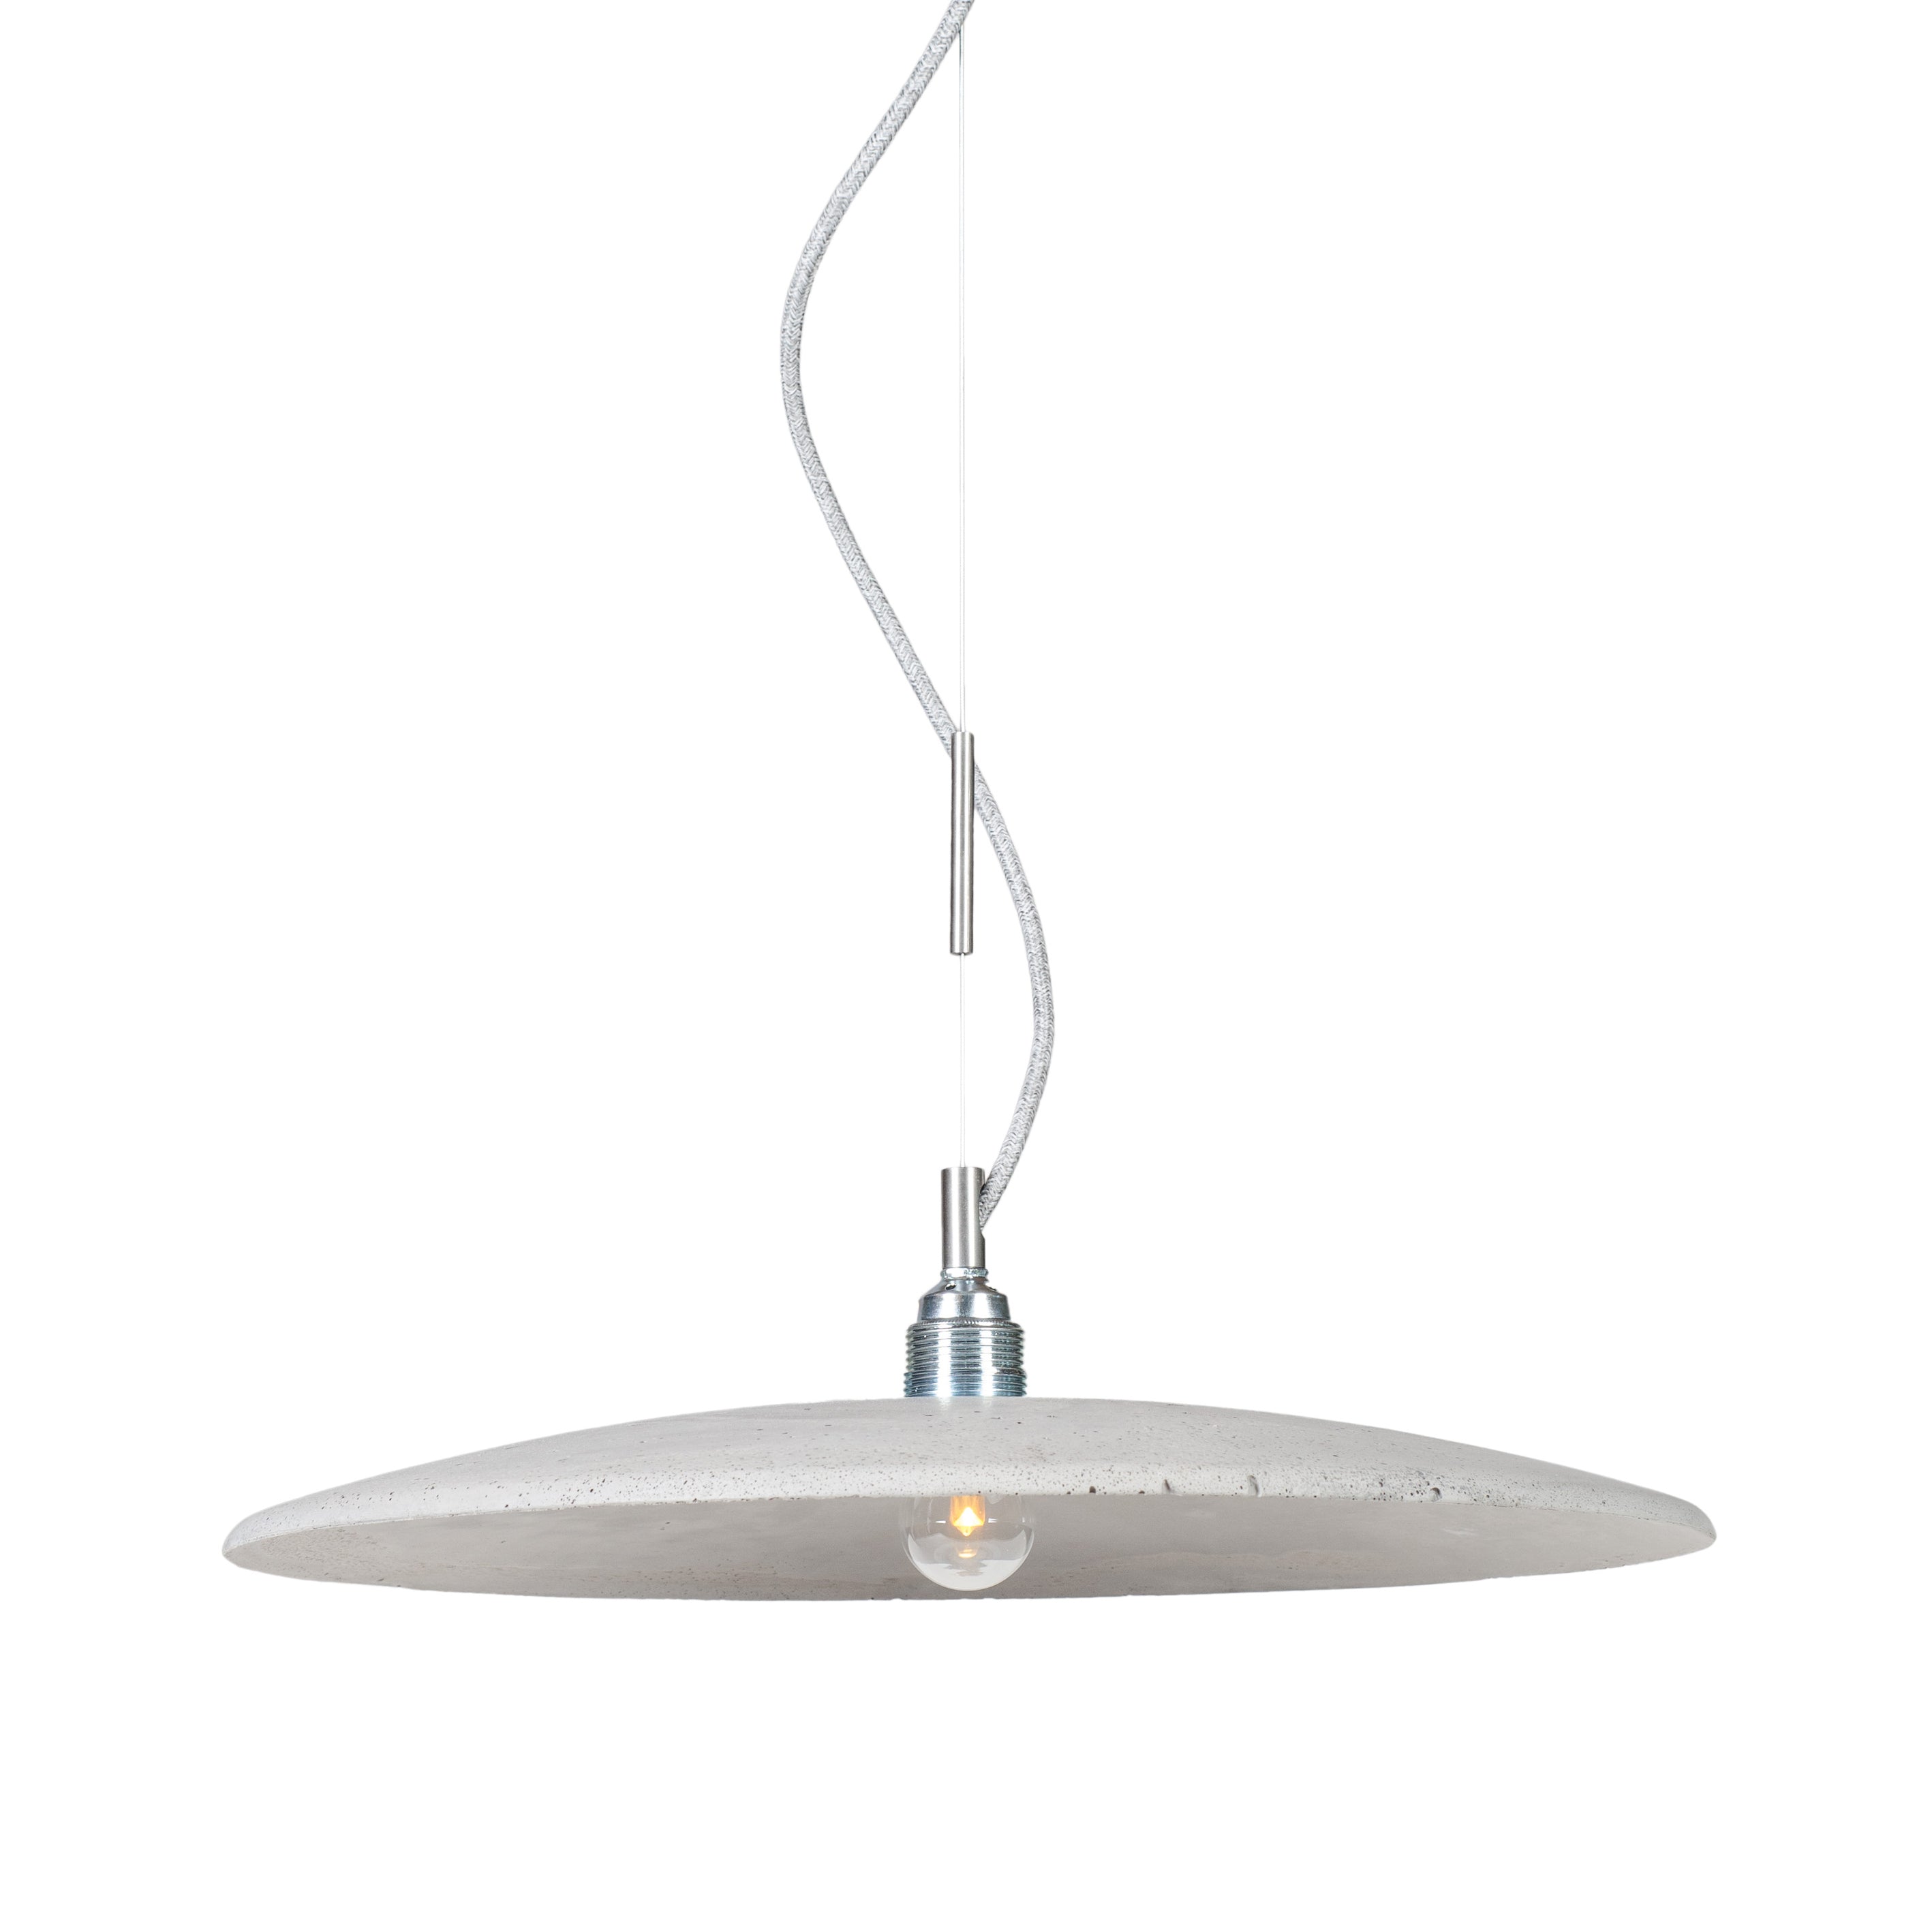 Loftlight Lotna pendant lamp in natural stony hue hand cast in concrete from Warehouse Home 